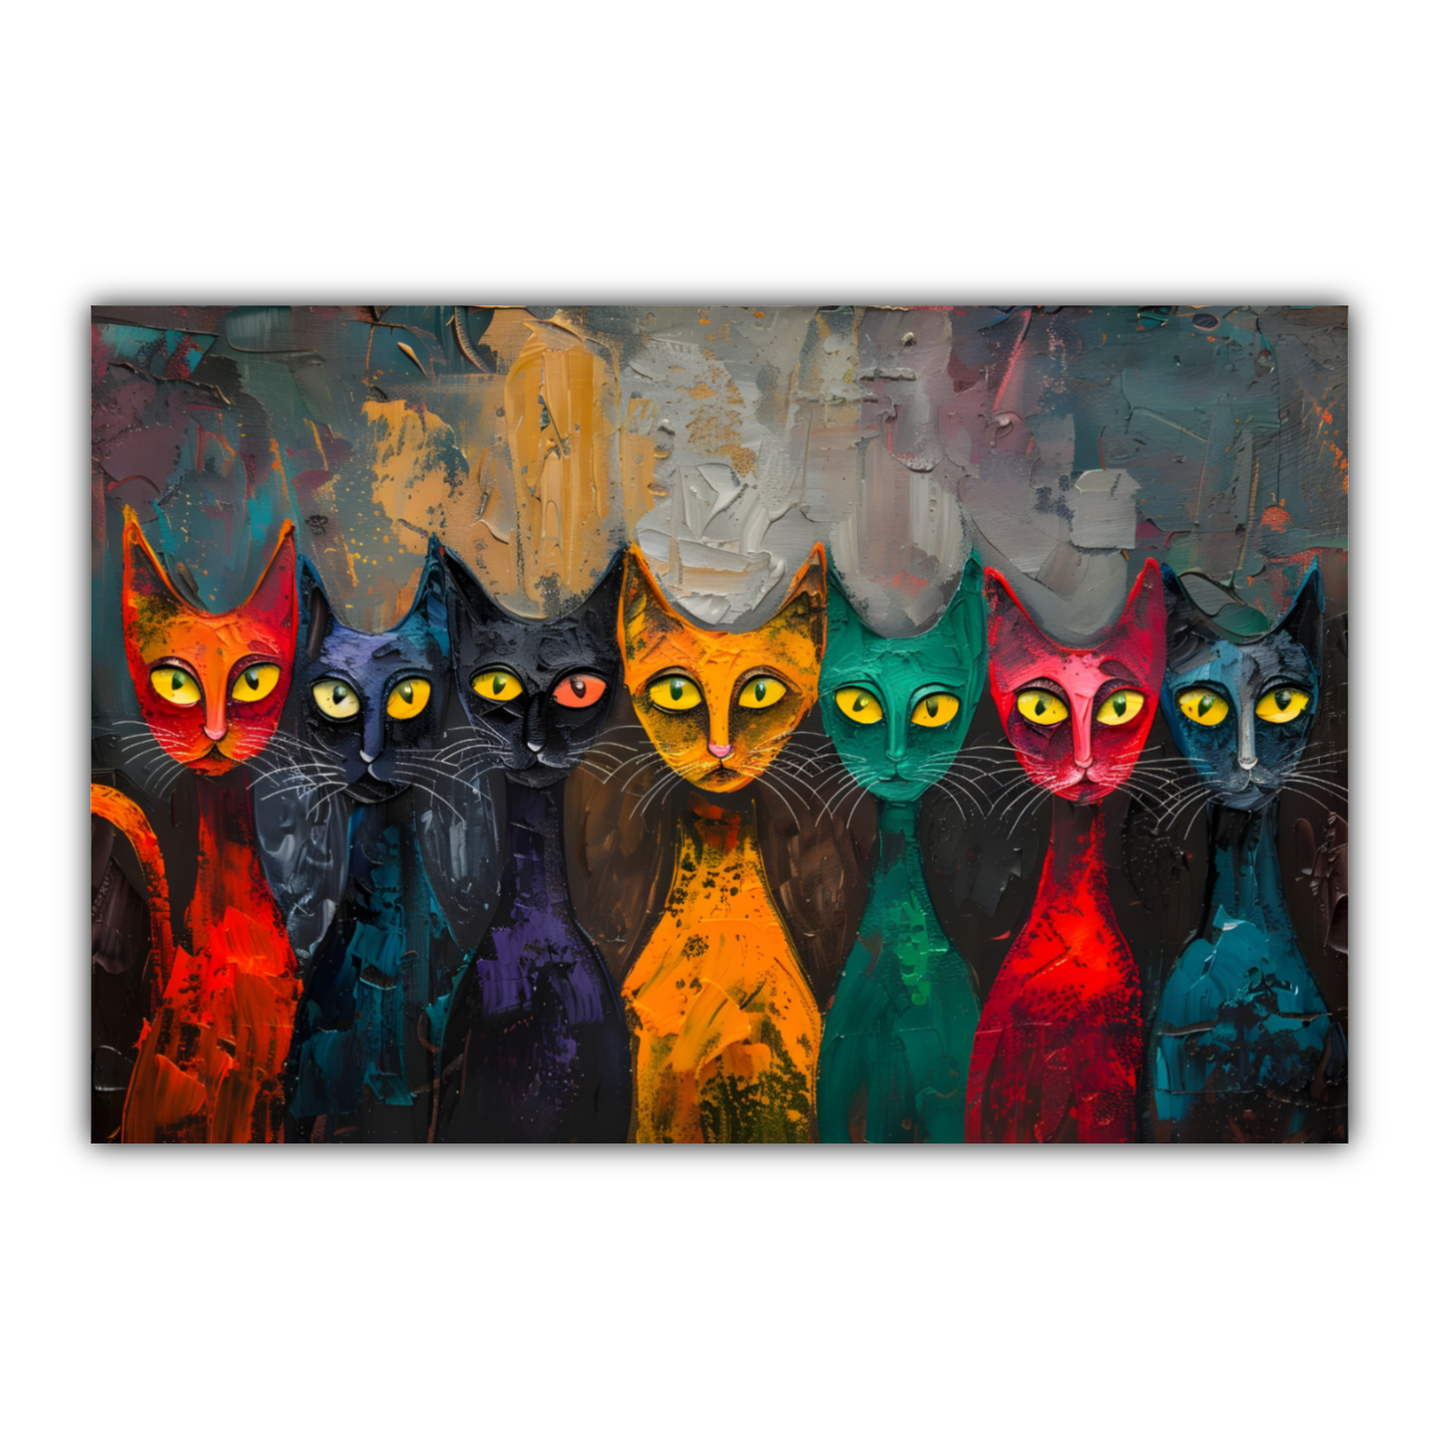 Council of Whiskers  Deluxe Box Landscape Canvas Prints